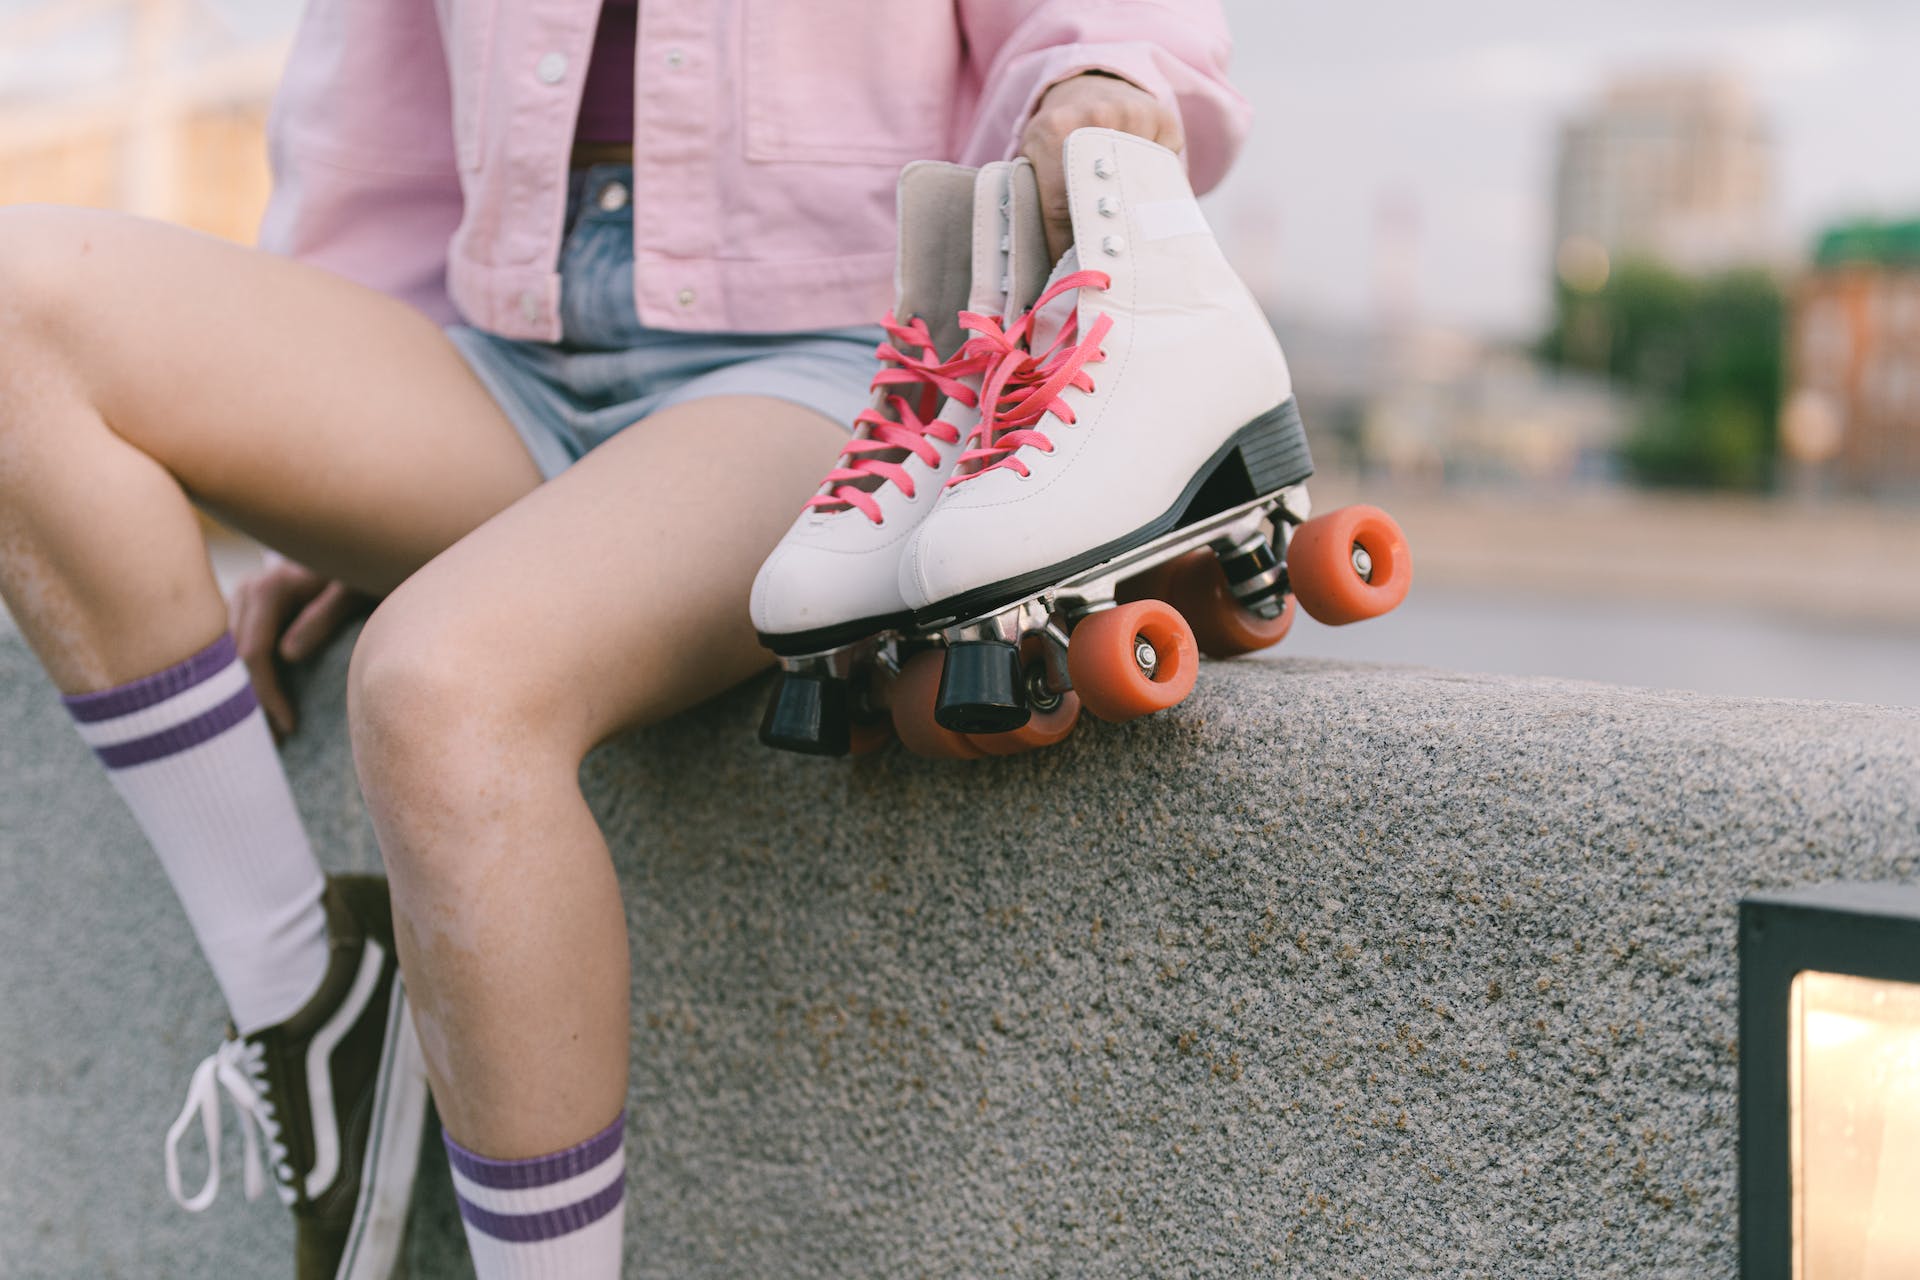 A person holding a pair of roller skates | Source: Pexels